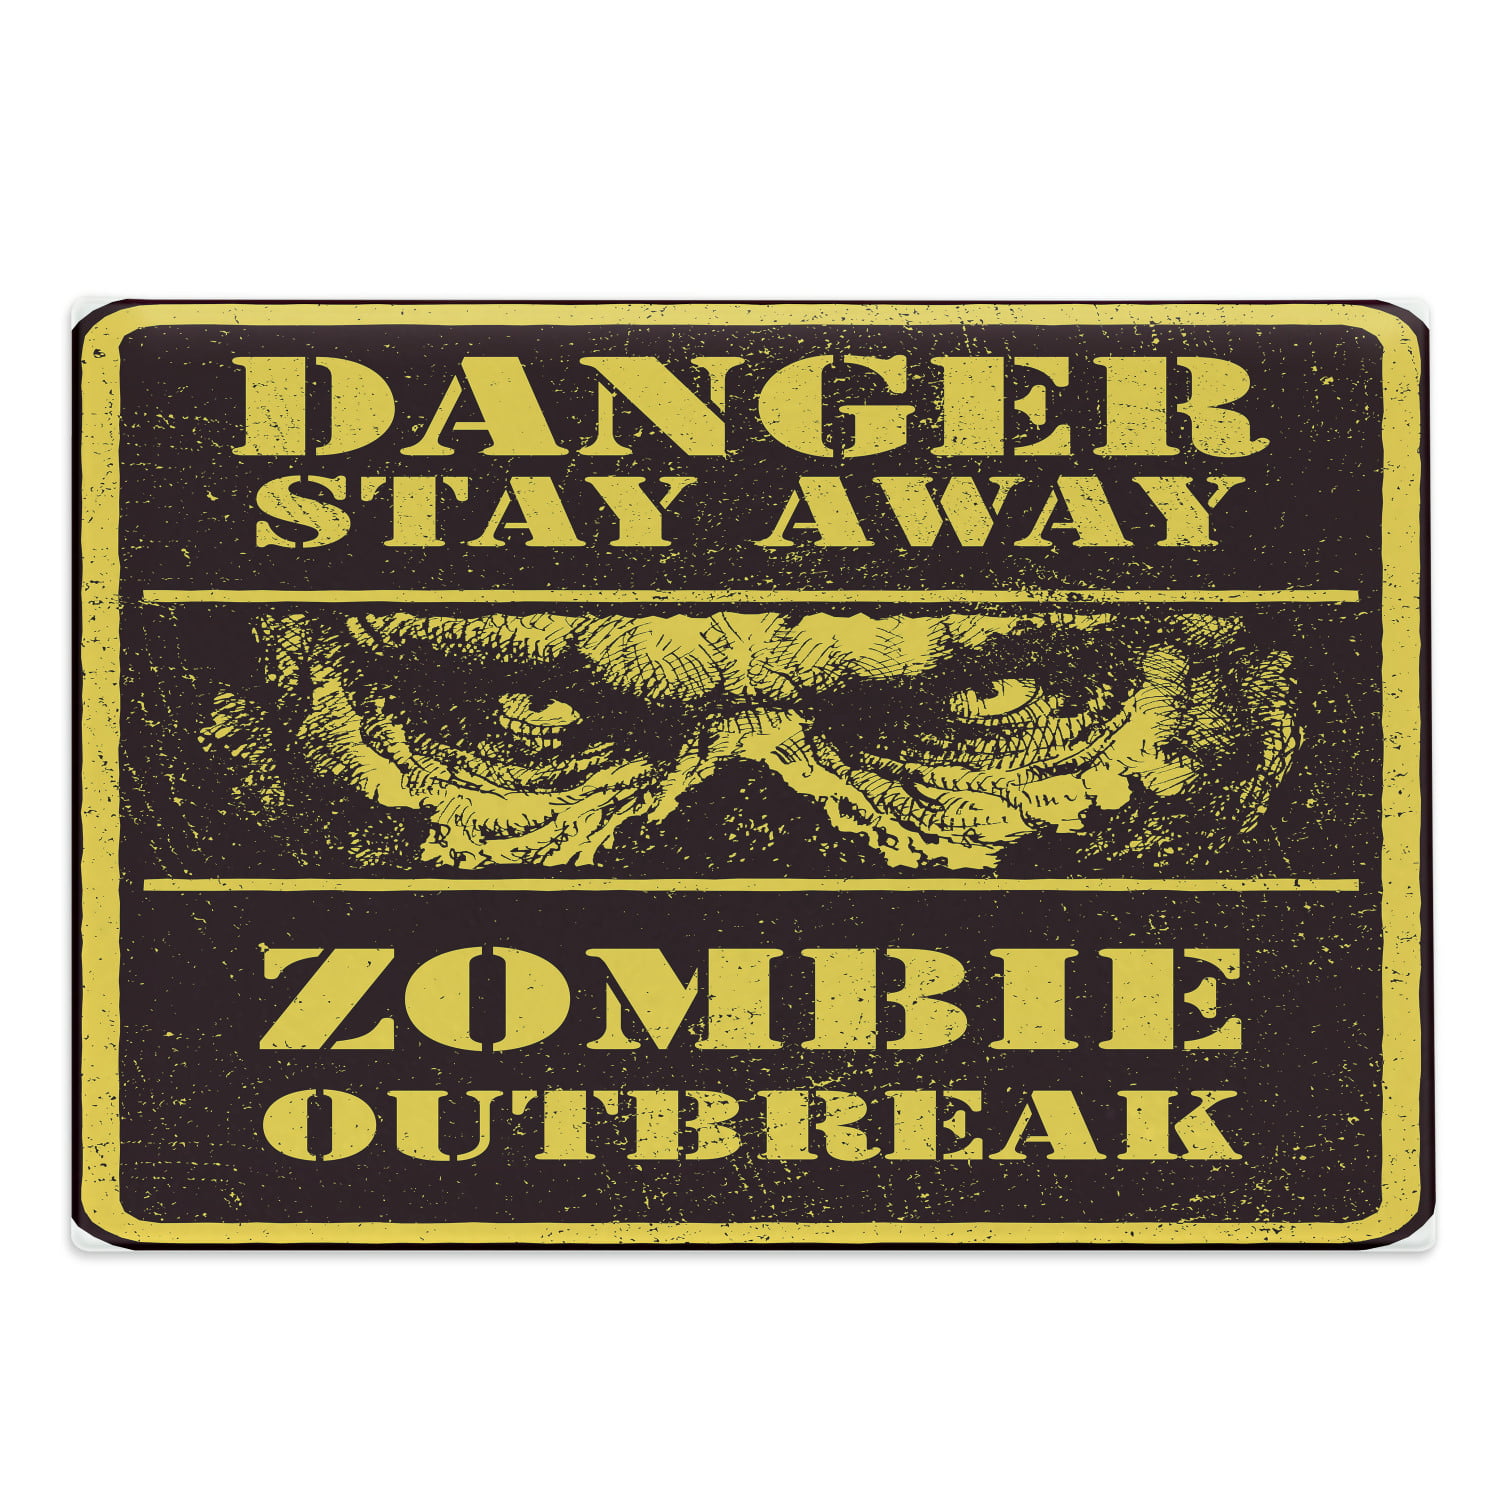 Zombie Cutting Board, Danger Stay Away Outbreak Message Monster Warning  Sign Graphic Design, Decorative Tempered Glass Cutting and Serving Board,  Small Size, Chestnut Brown Yellow, by Ambesonne - Walmart.com